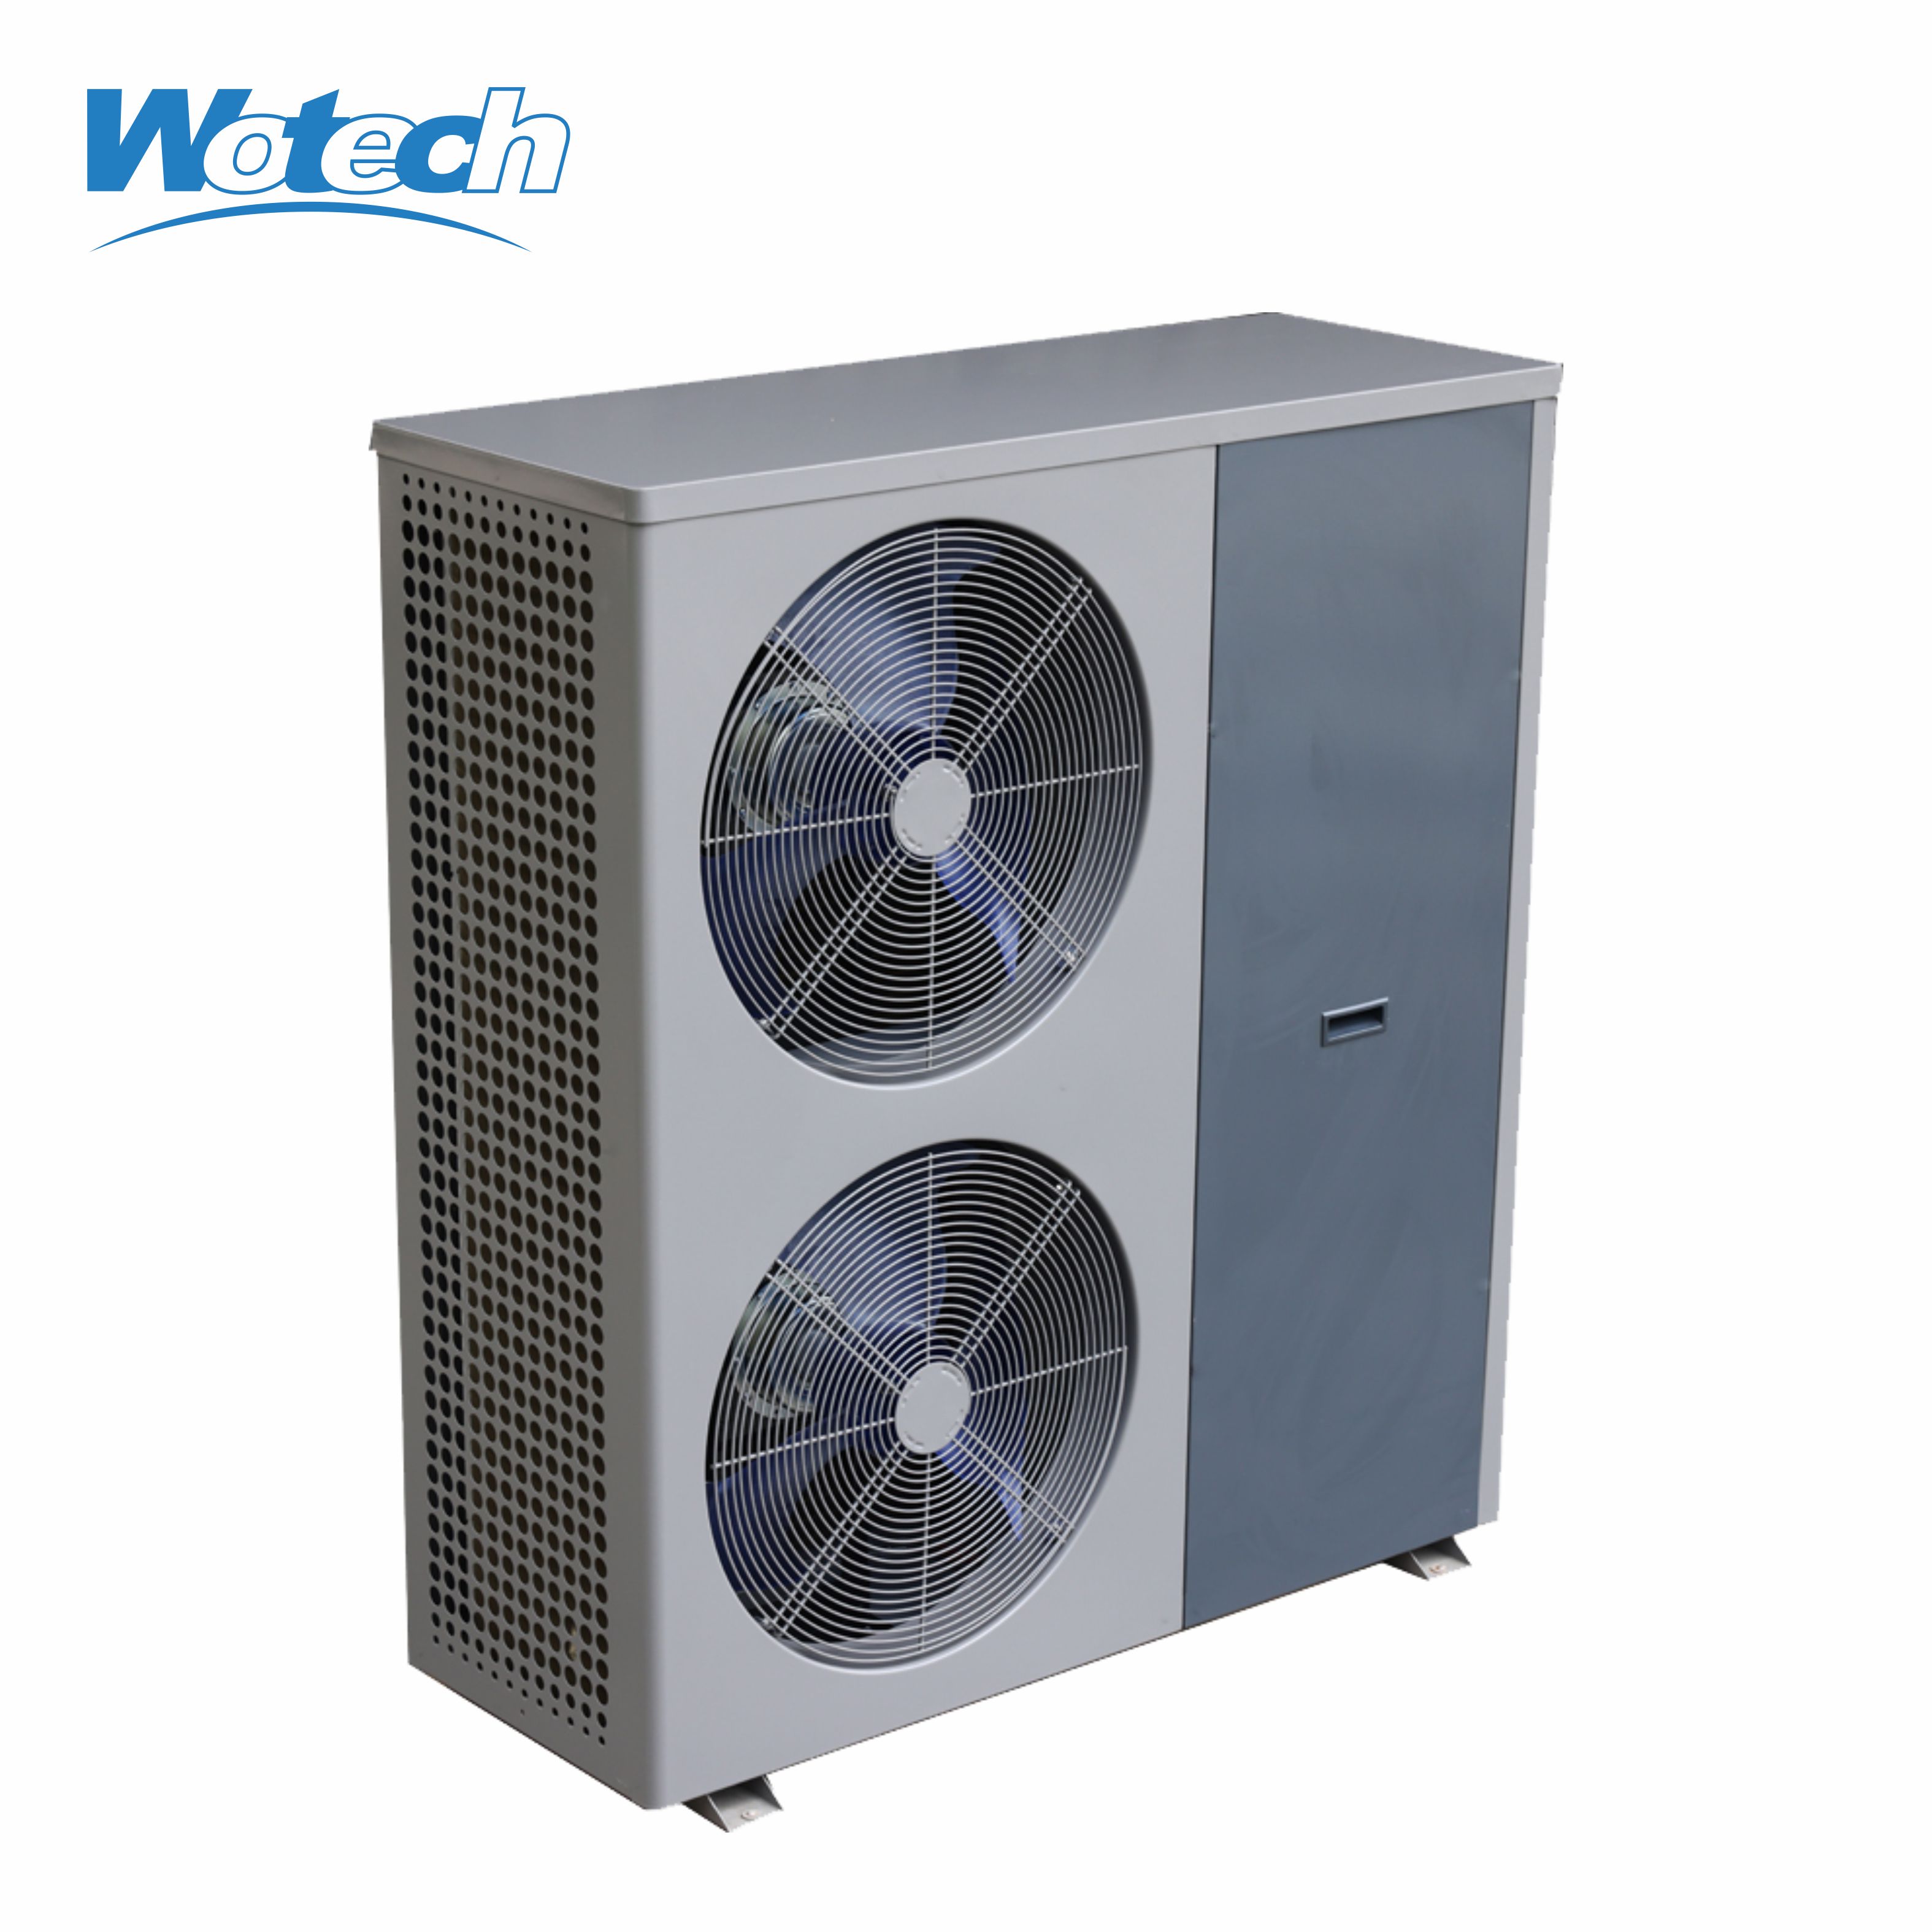 R32 Residentail Fixed Frequency Air Source Heat Pump with Smart Control System